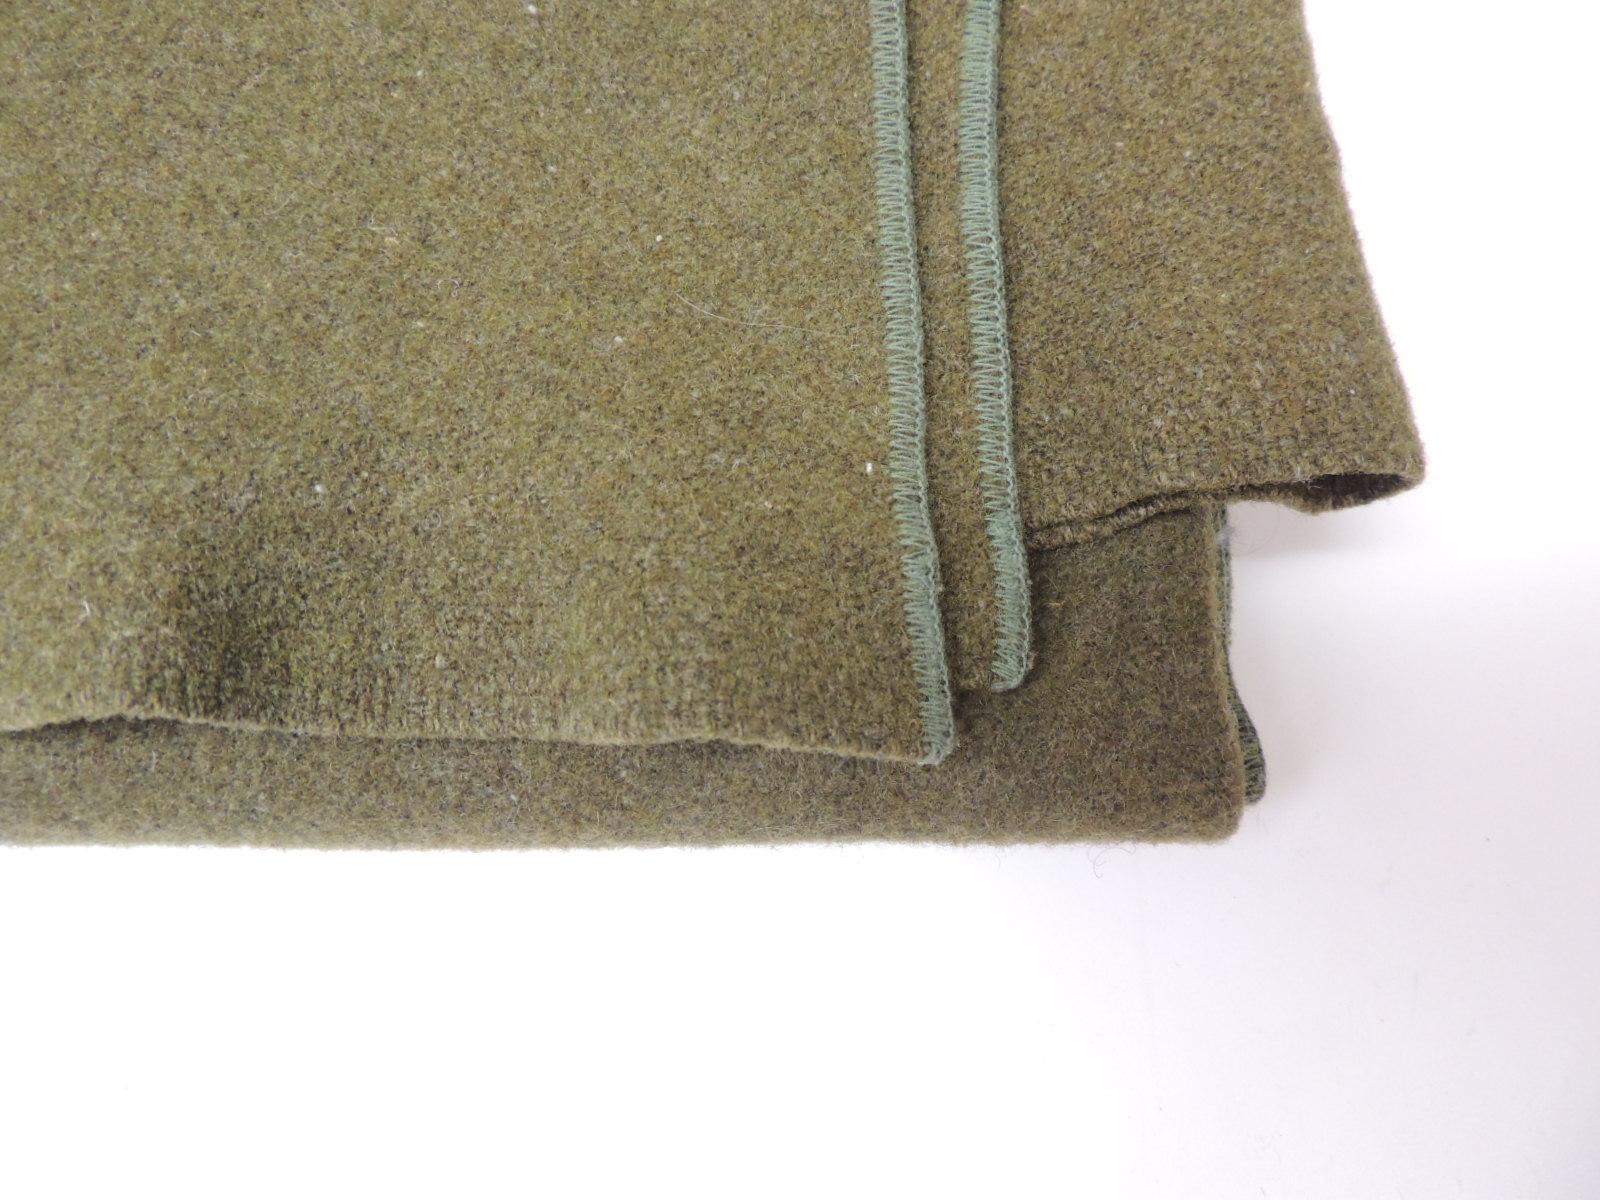 Army green wool blanket. (finished on all sides)
Reversible
Size: 63 W x 84 L.